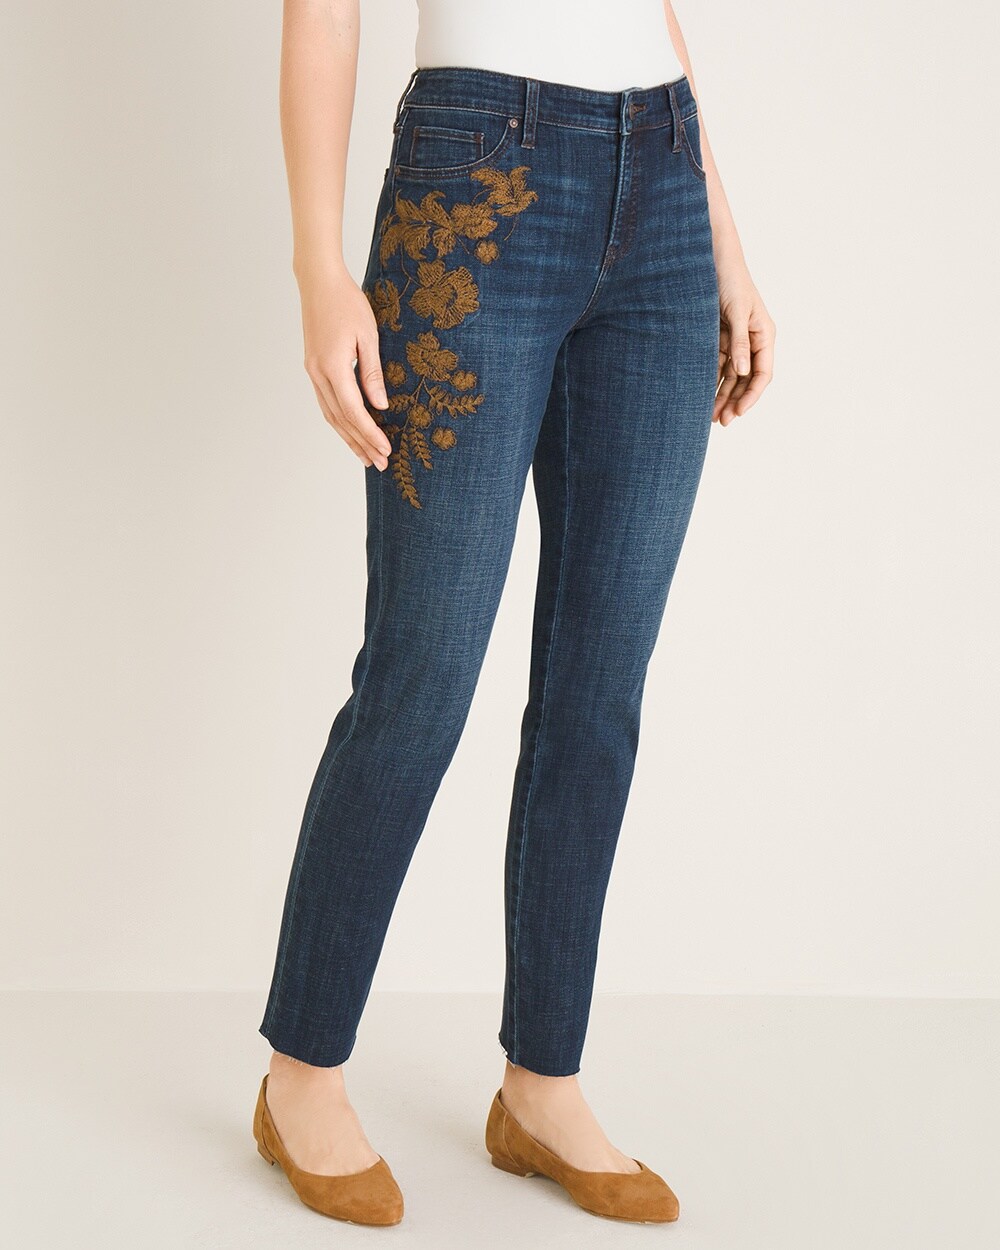 So Slimming Floral-Embroidered Girlfriend Ankle Jeans